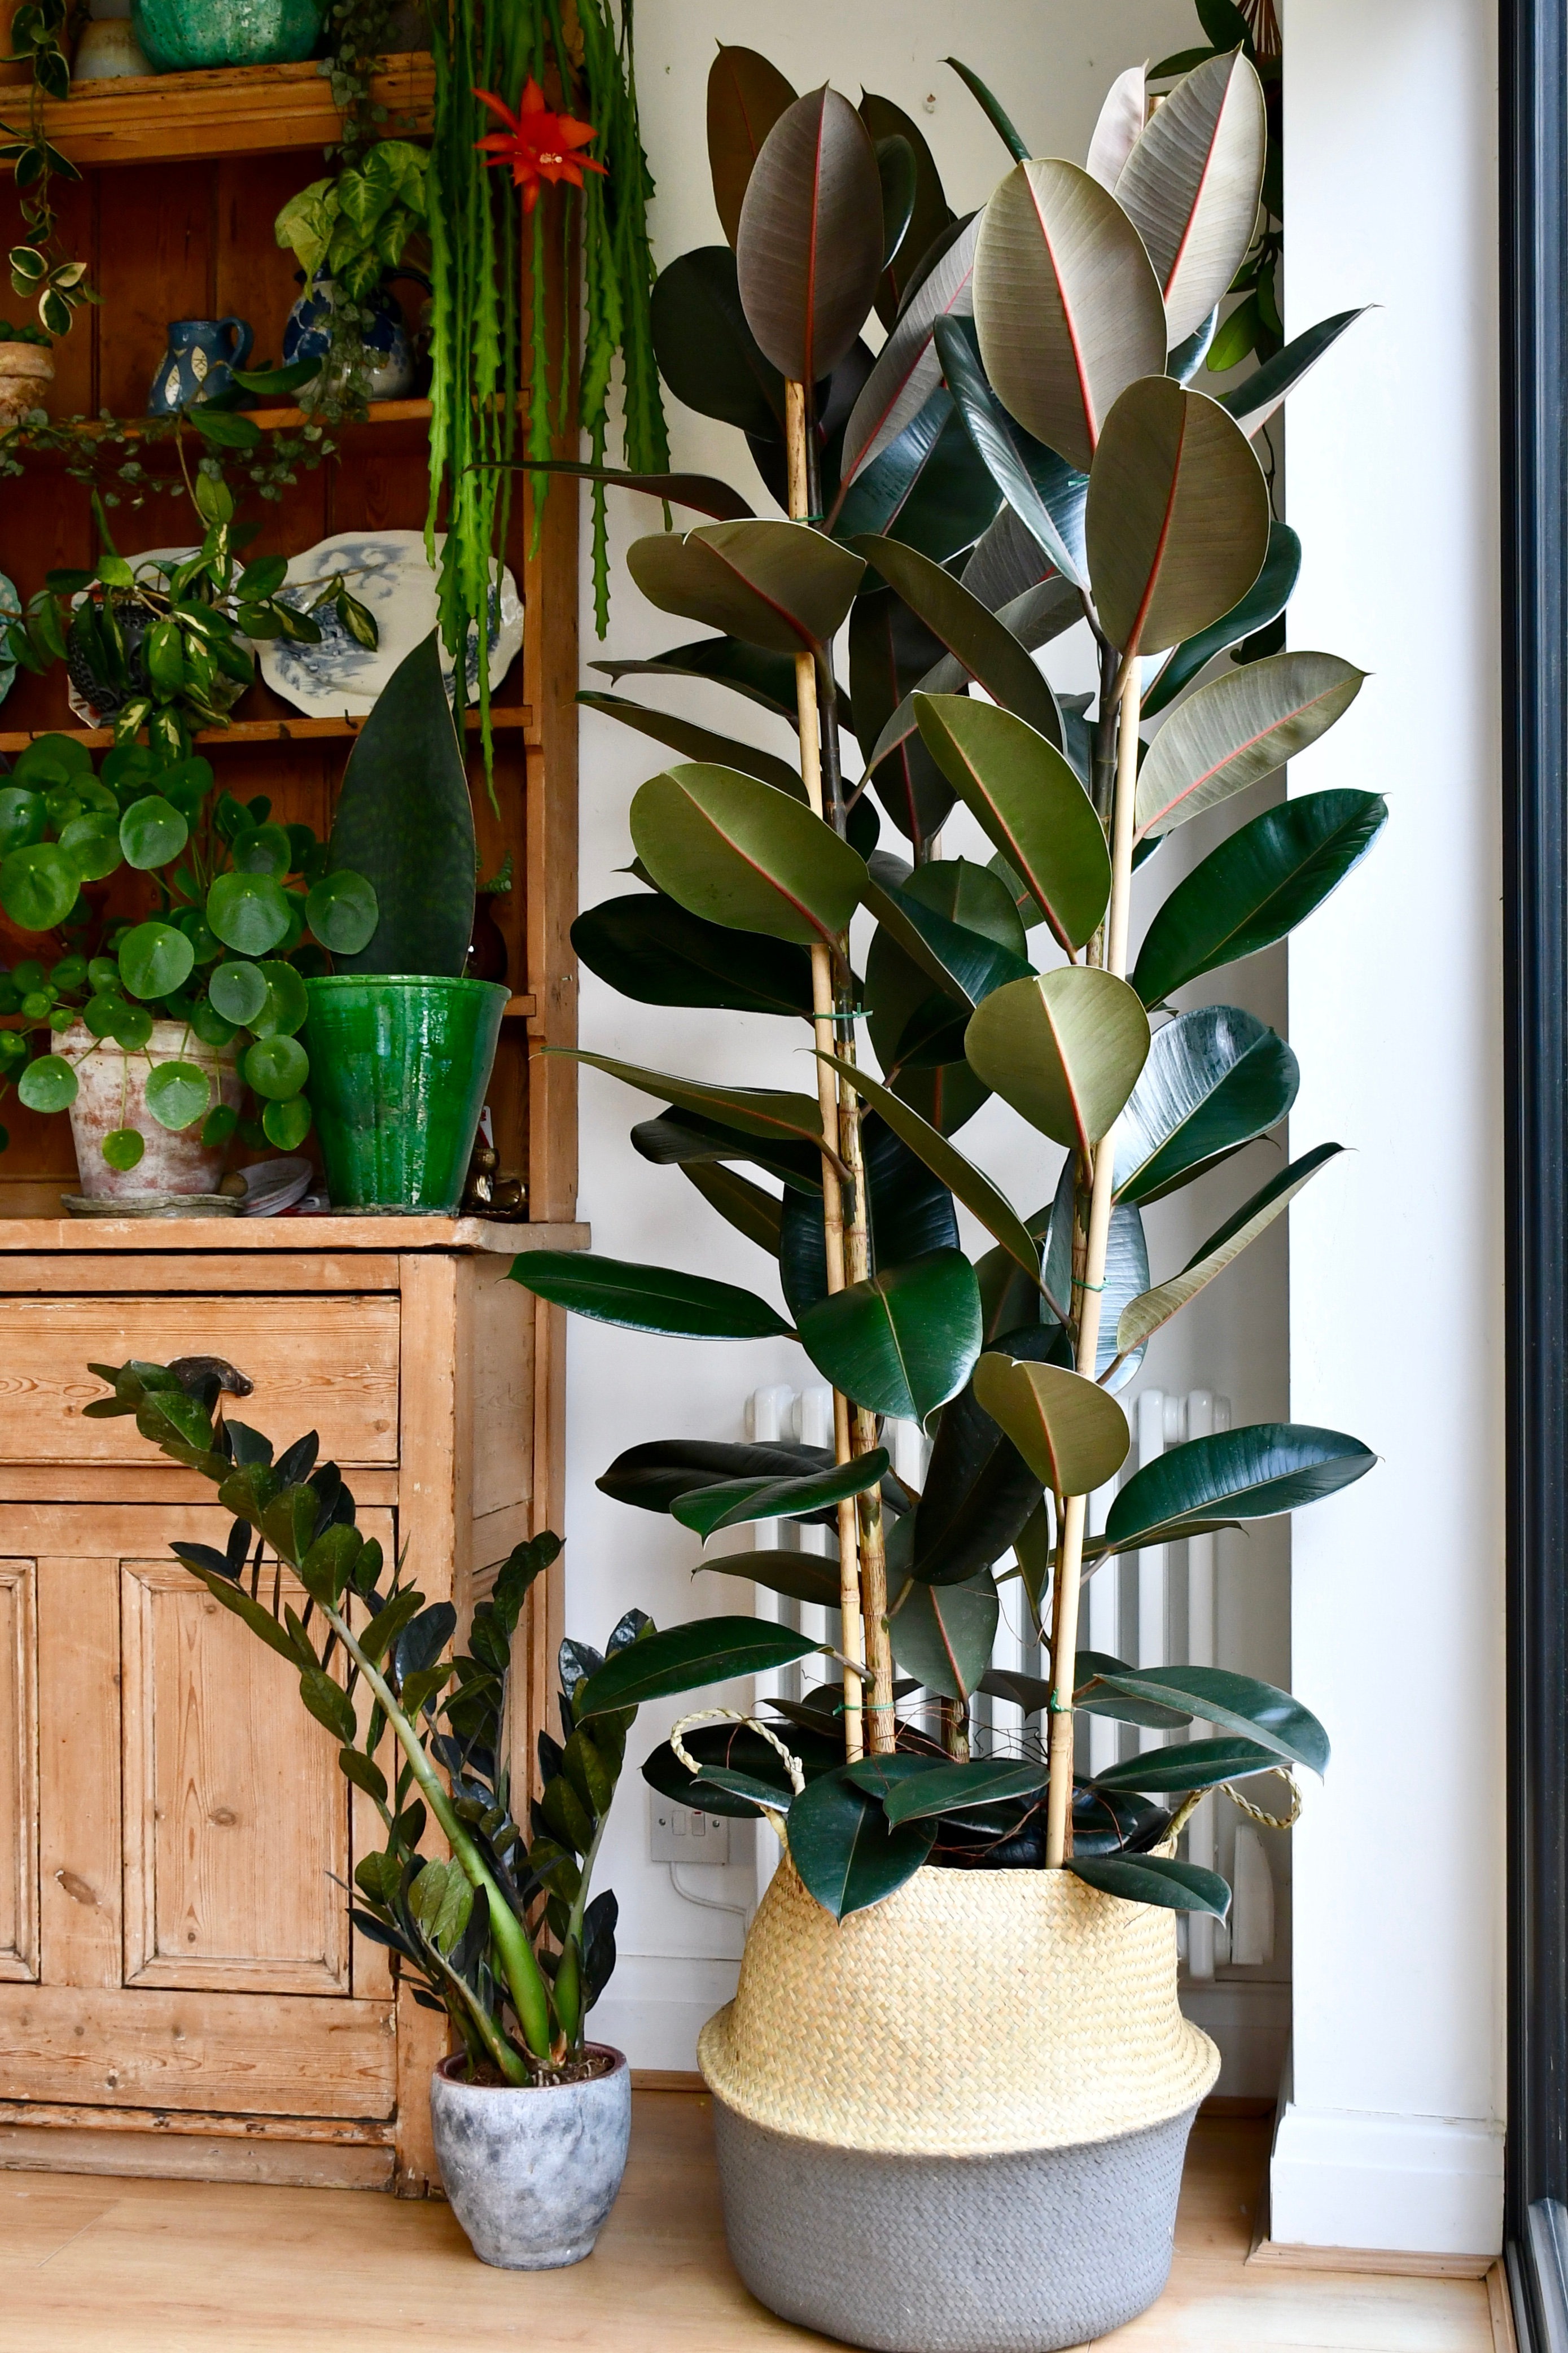 The 26 most beautiful trees that you can grow as houseplants in your living space - 191